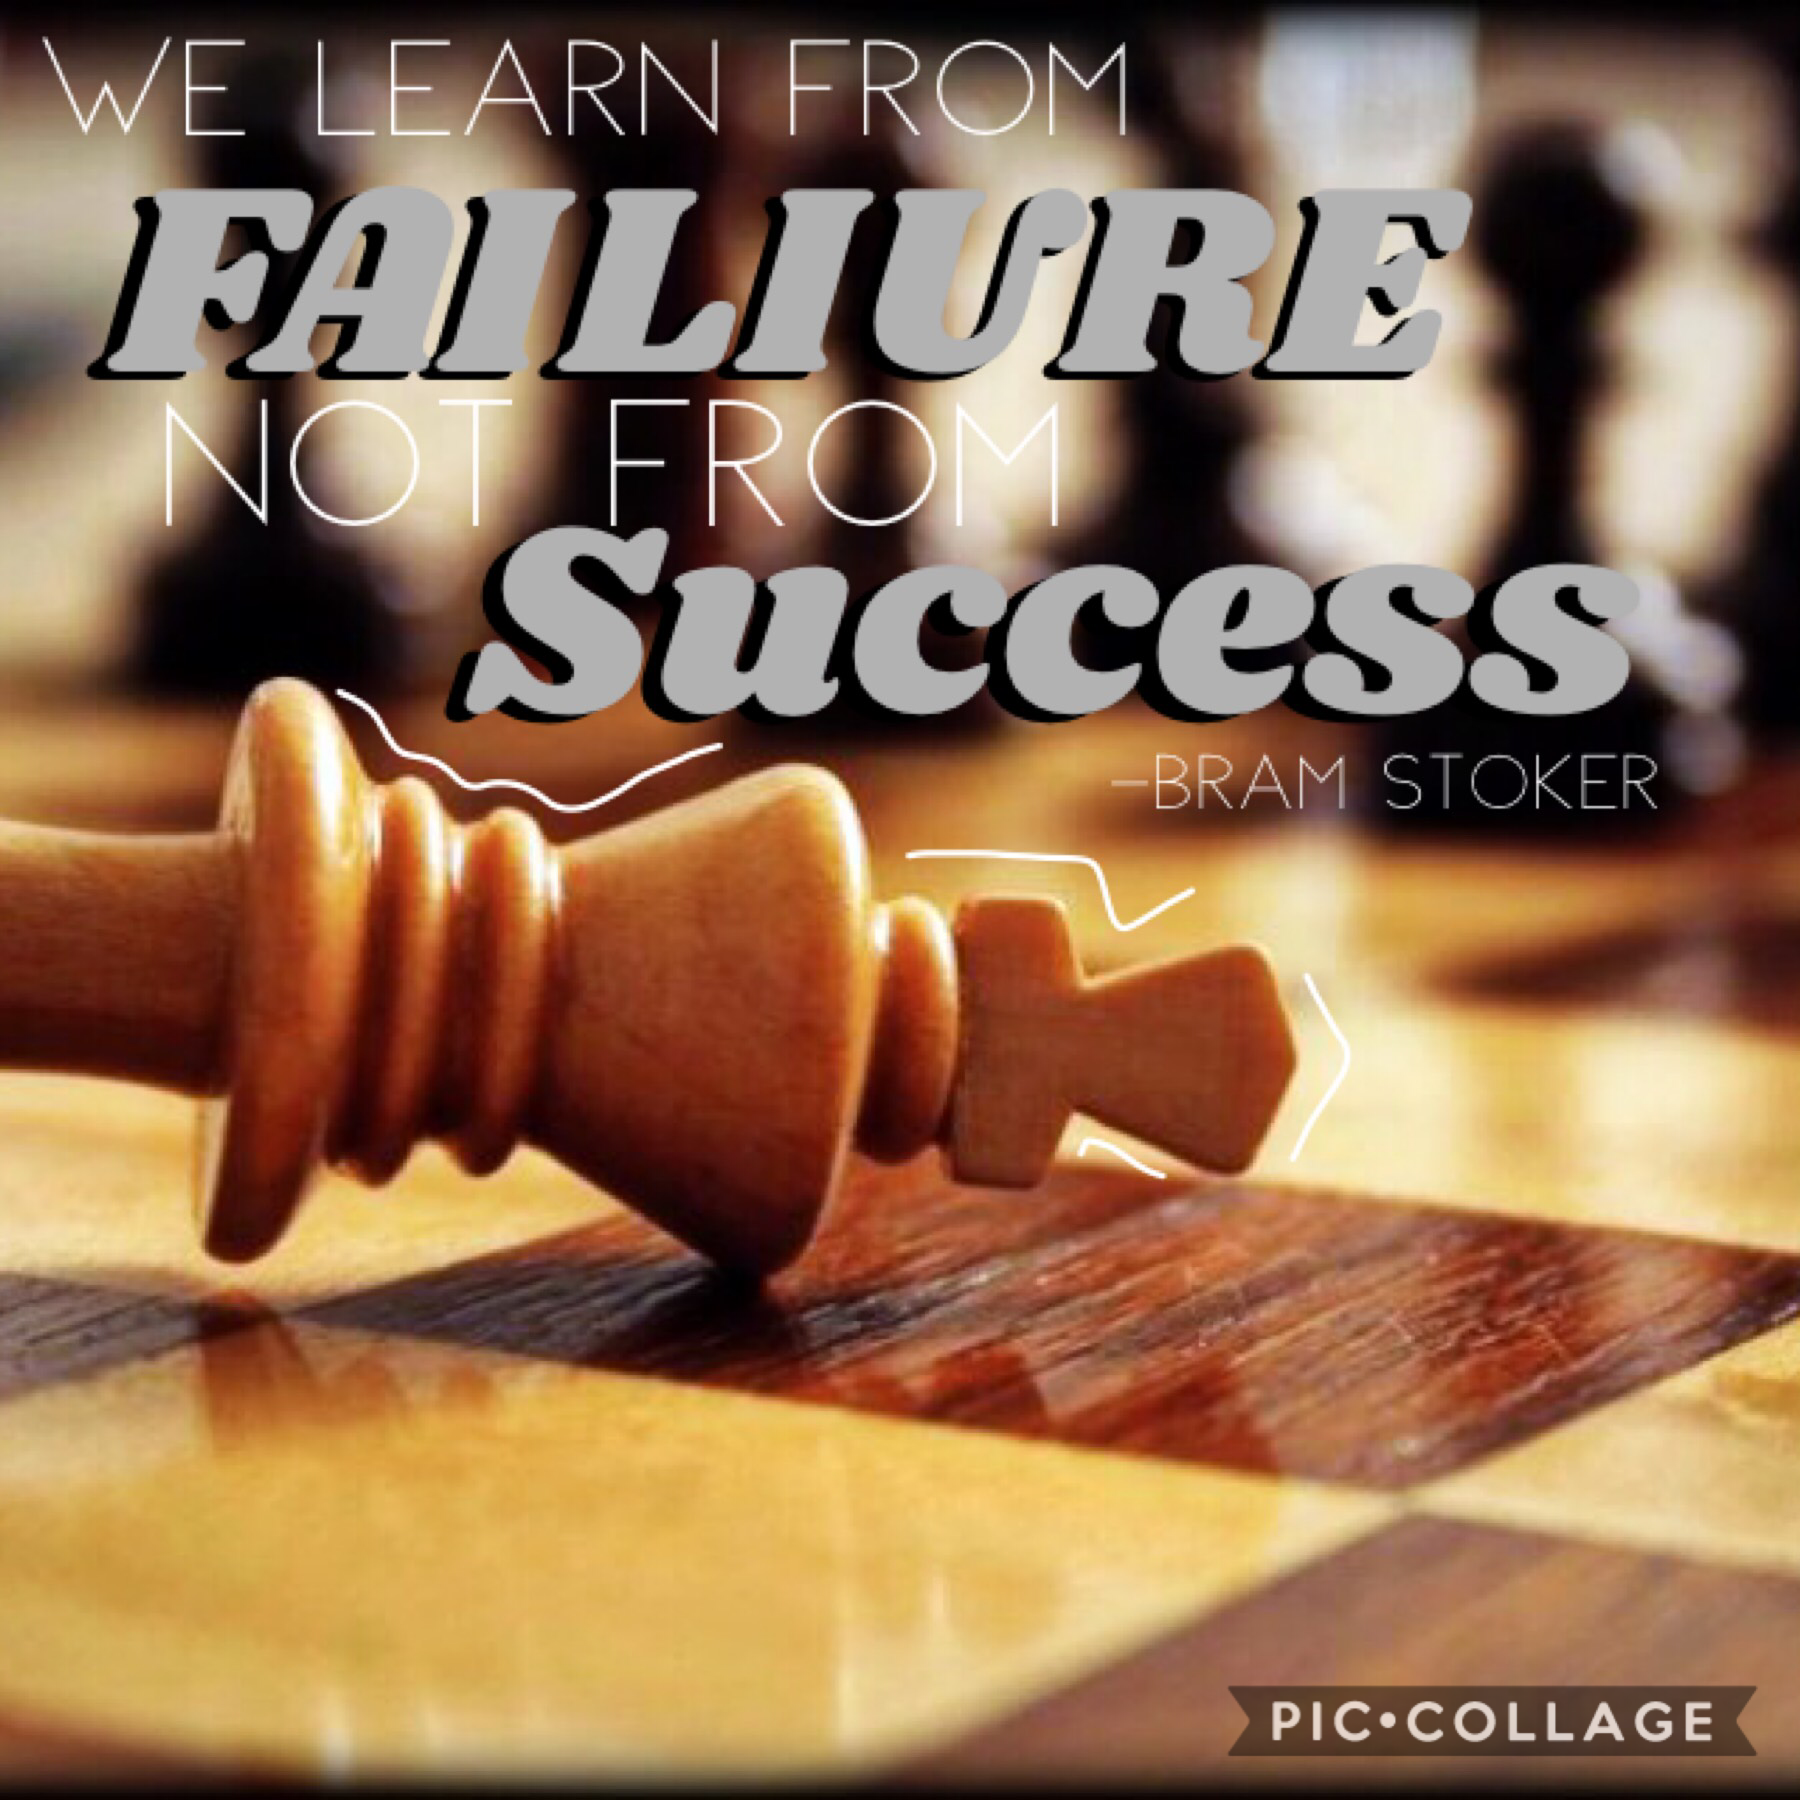 We don’t learn by success, but we do from failure.